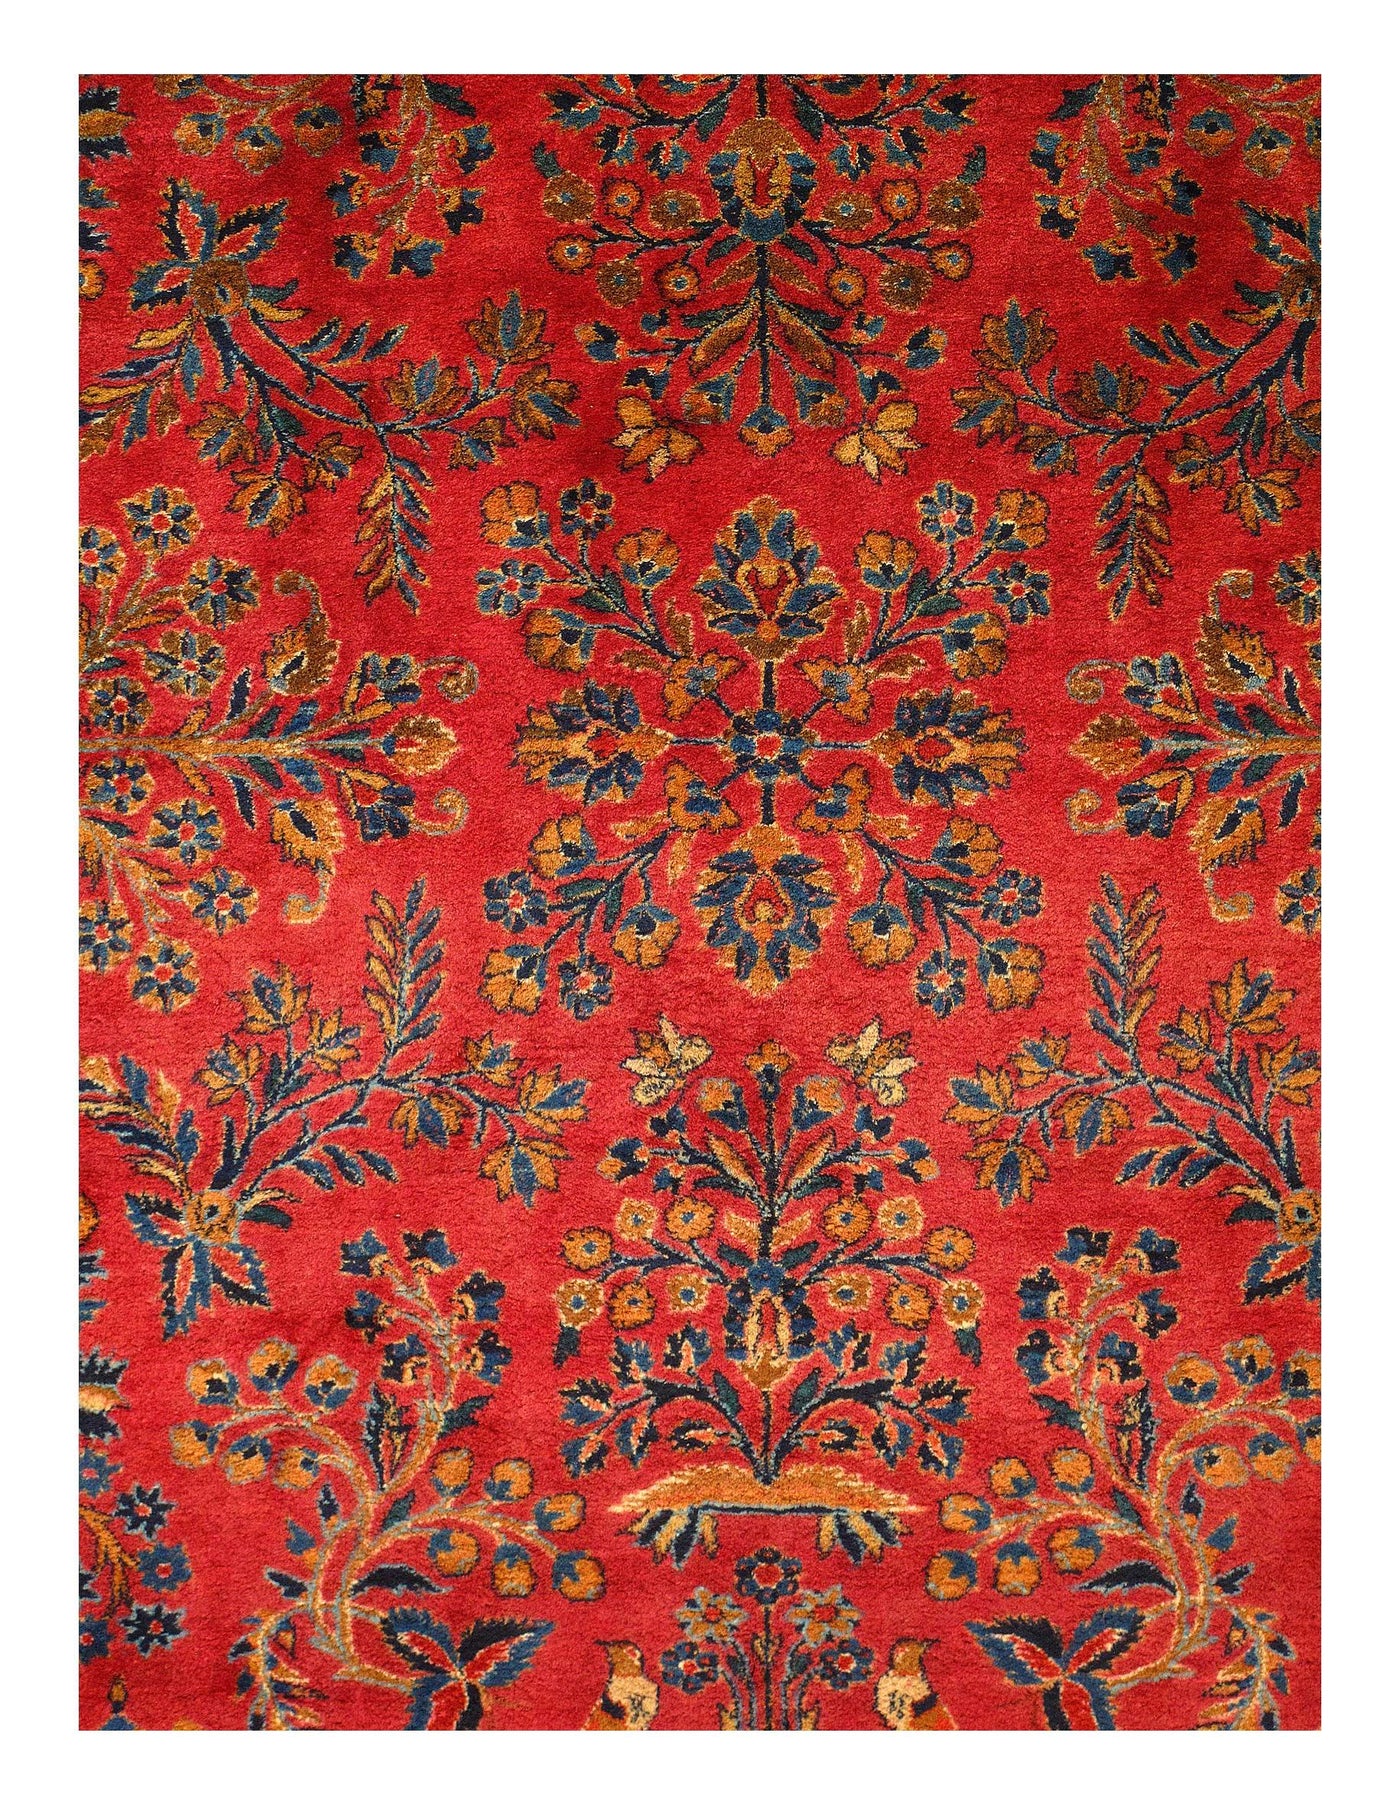 Canvello Manchester Kashan Persian Wool Rug - 7'9'' X 10'7''